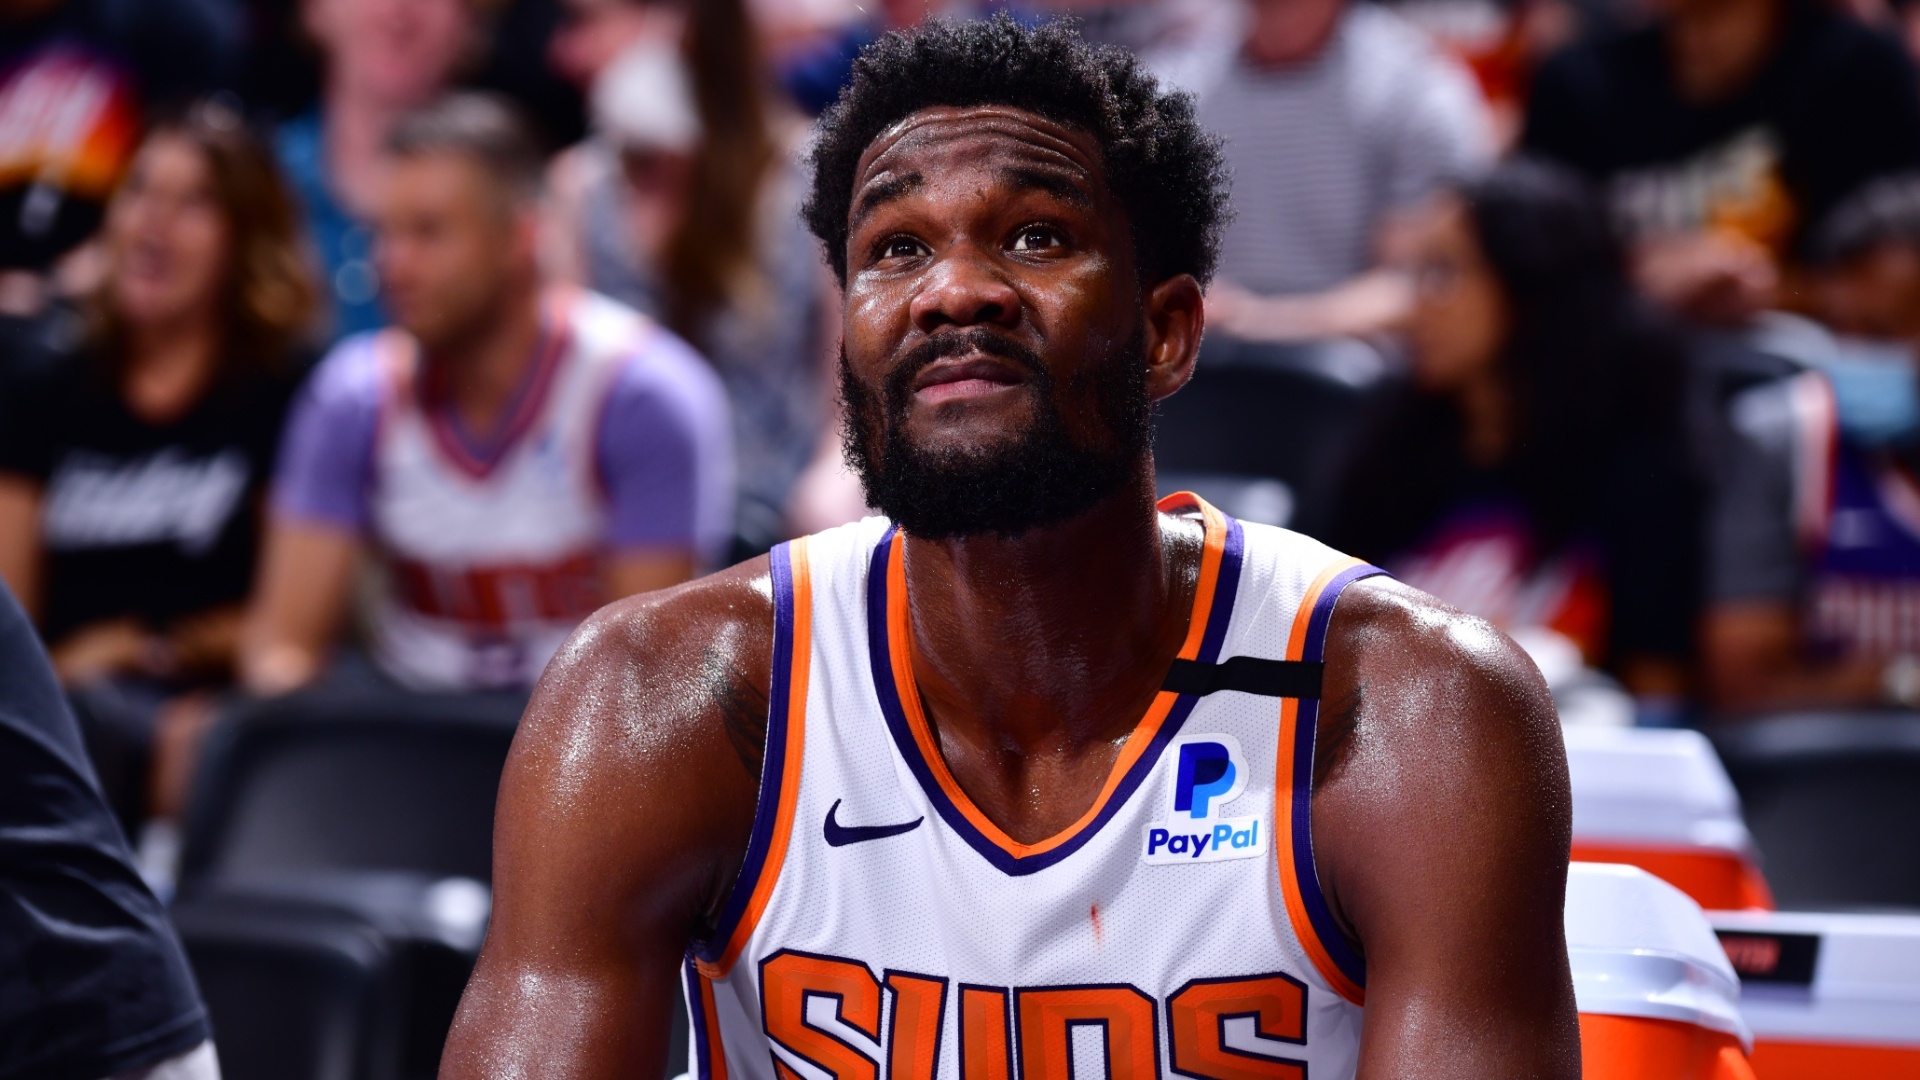 NBA Playoffs 2021 Deandre Ayton and his excellent performance to